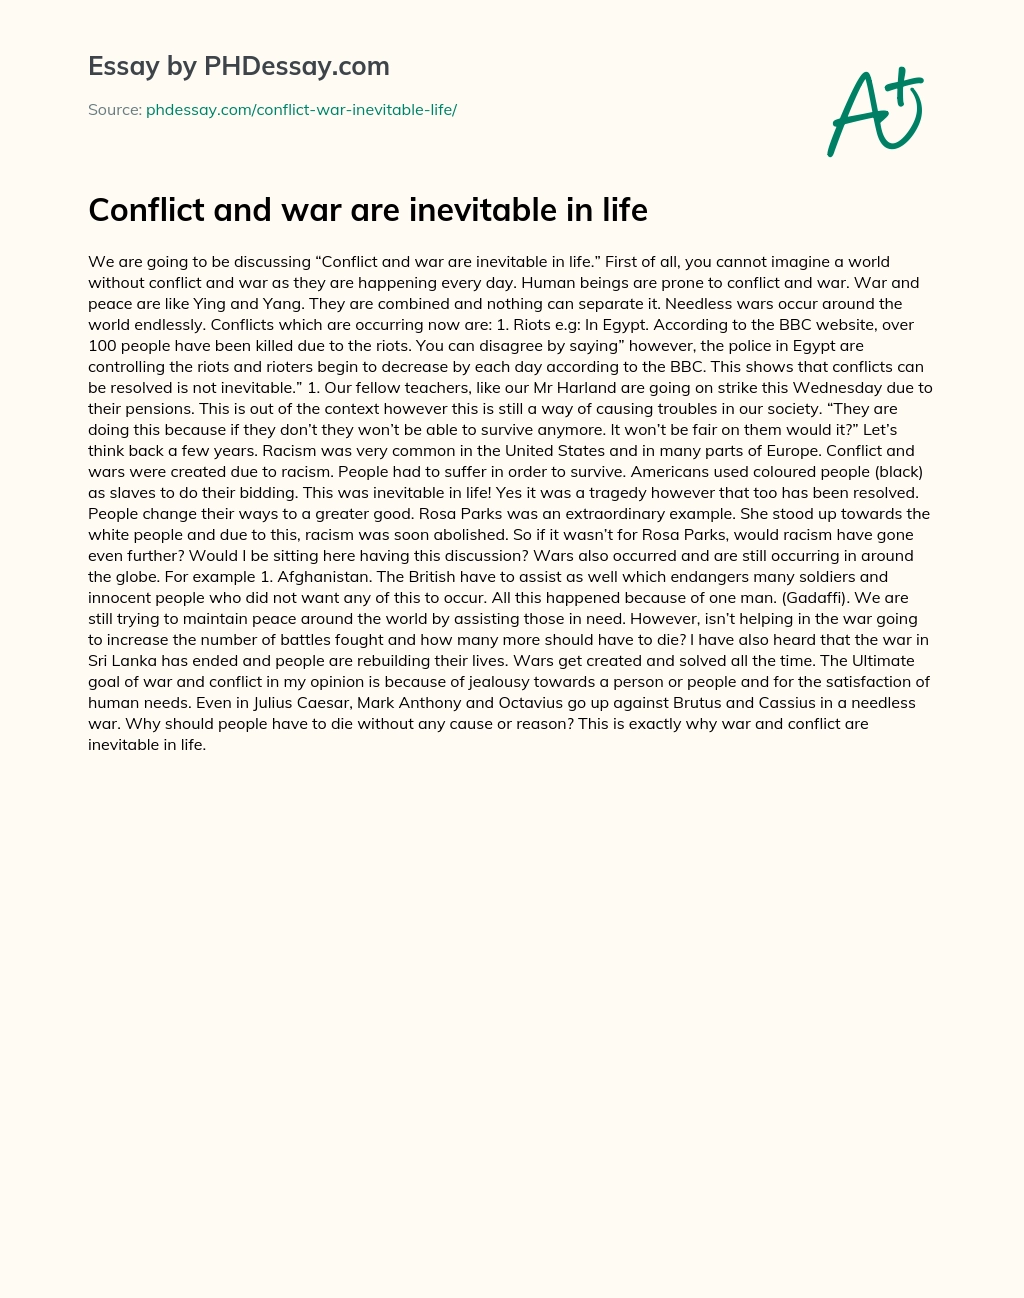 Conflict and war are inevitable in life essay